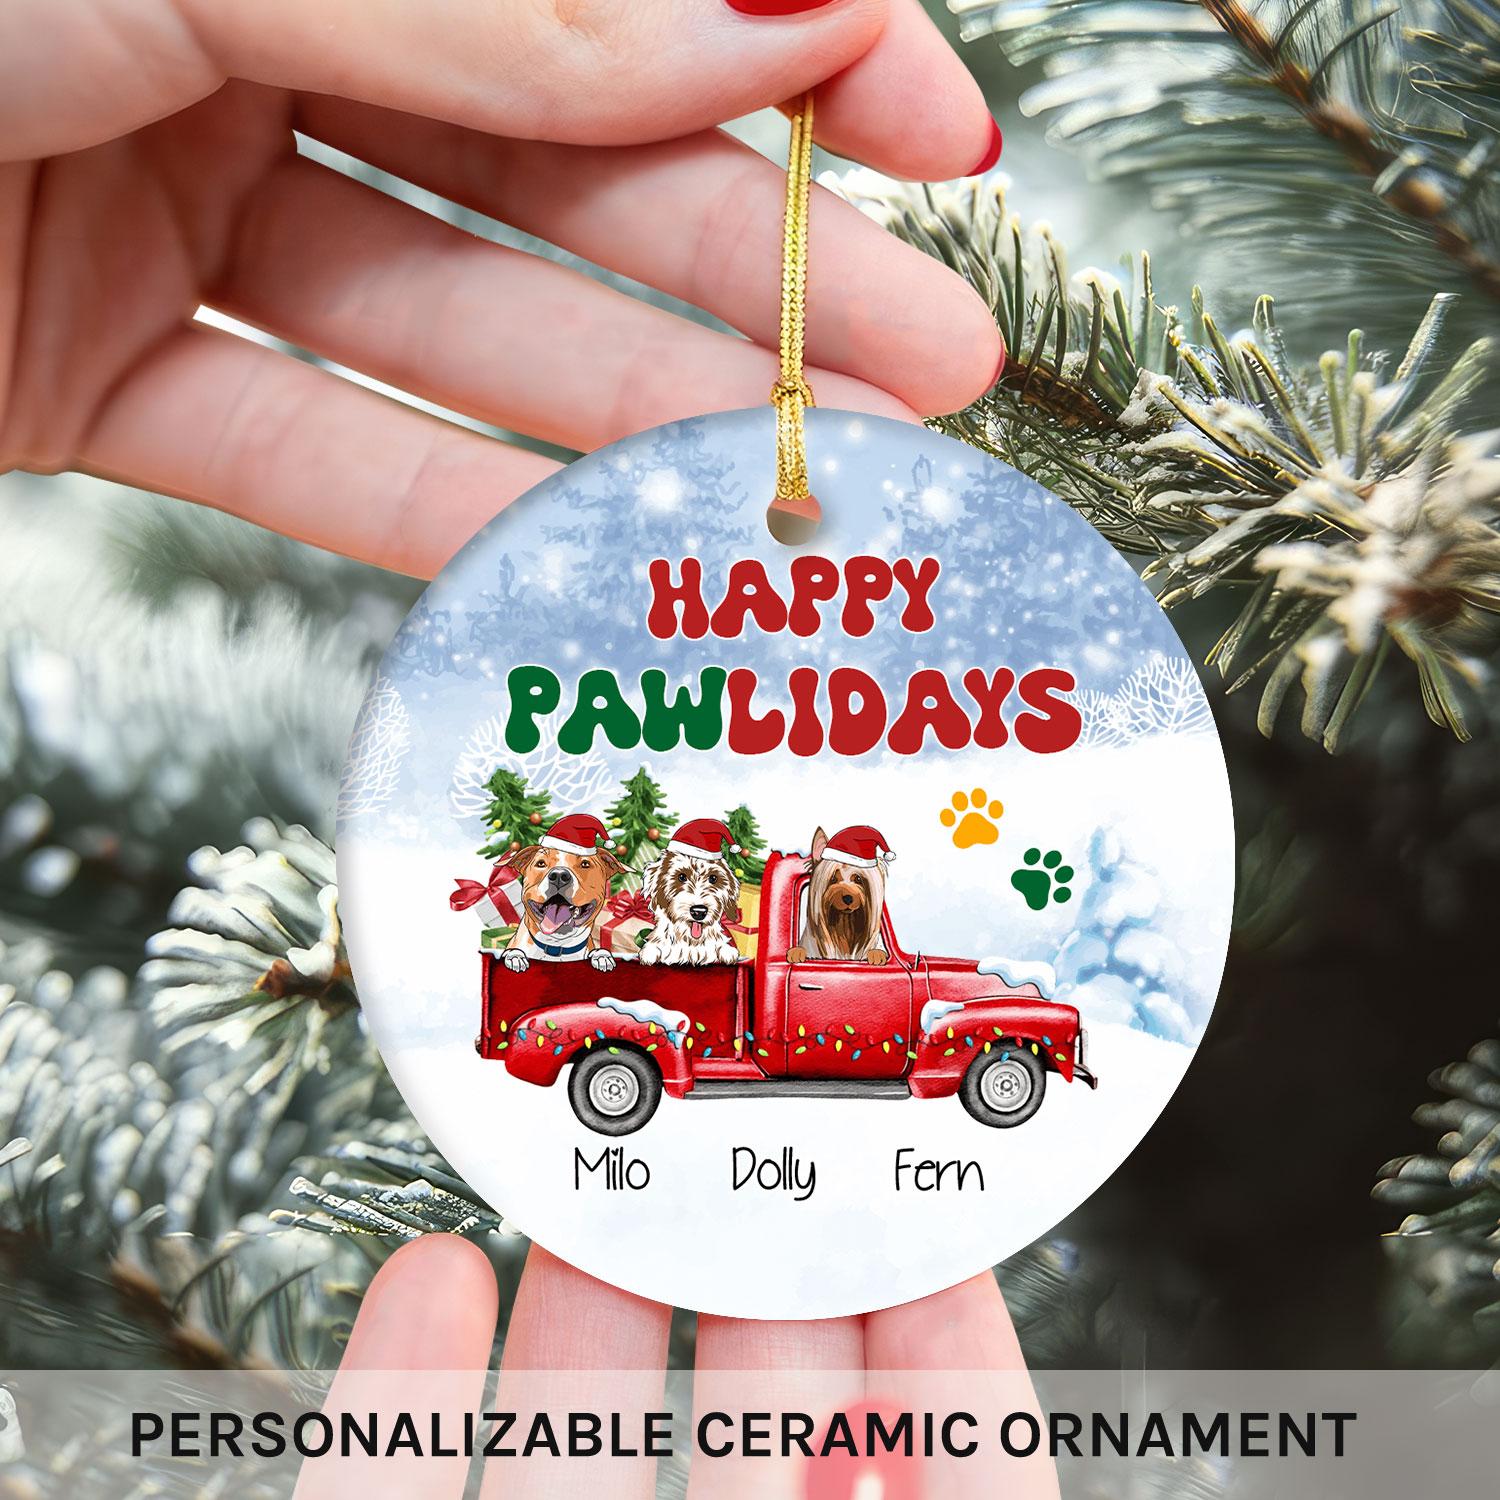 Happy Pawlidays - Personalized Christmas gift for Dog Lovers - Custom Circle Ceramic Ornament - MyMindfulGifts